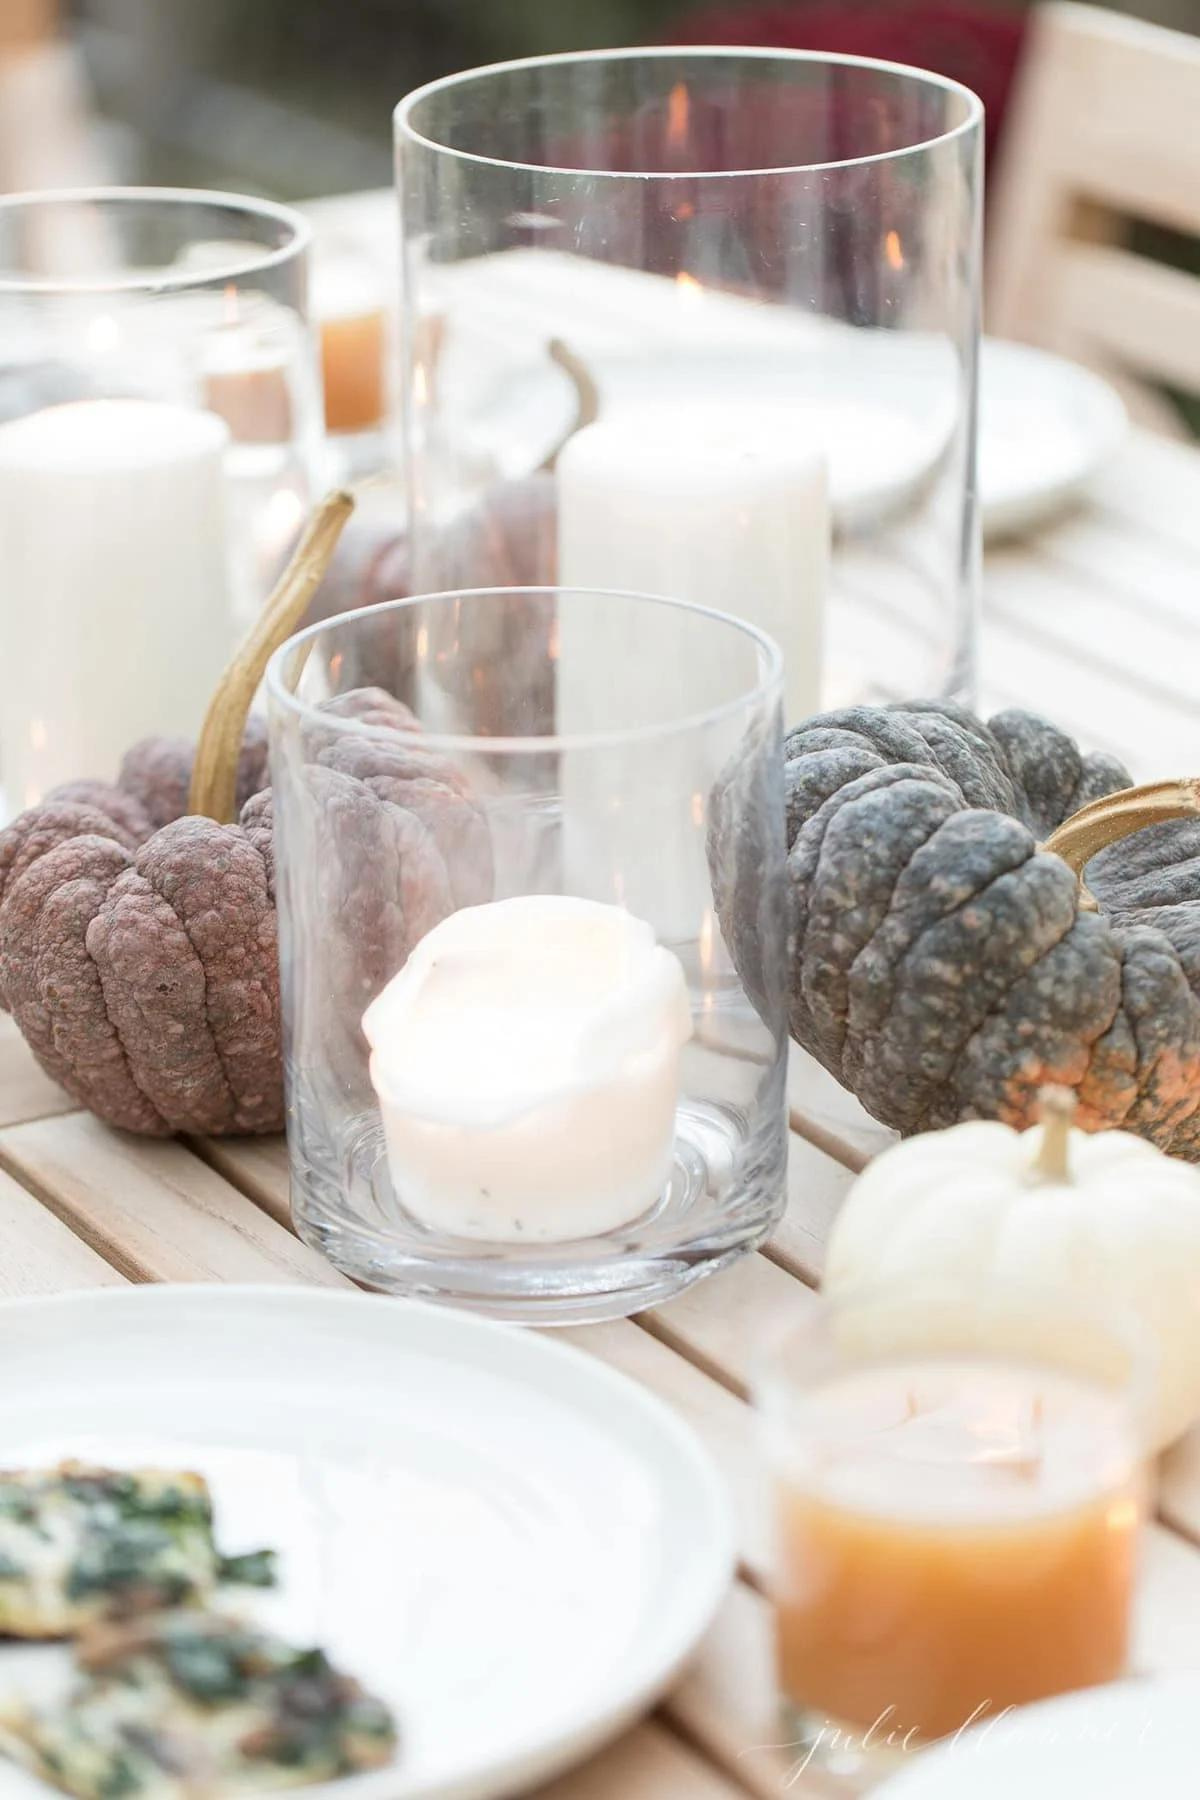 A Thanksgiving table with candles and pumpkins as centerpieces, creating a beautiful and festive decor.